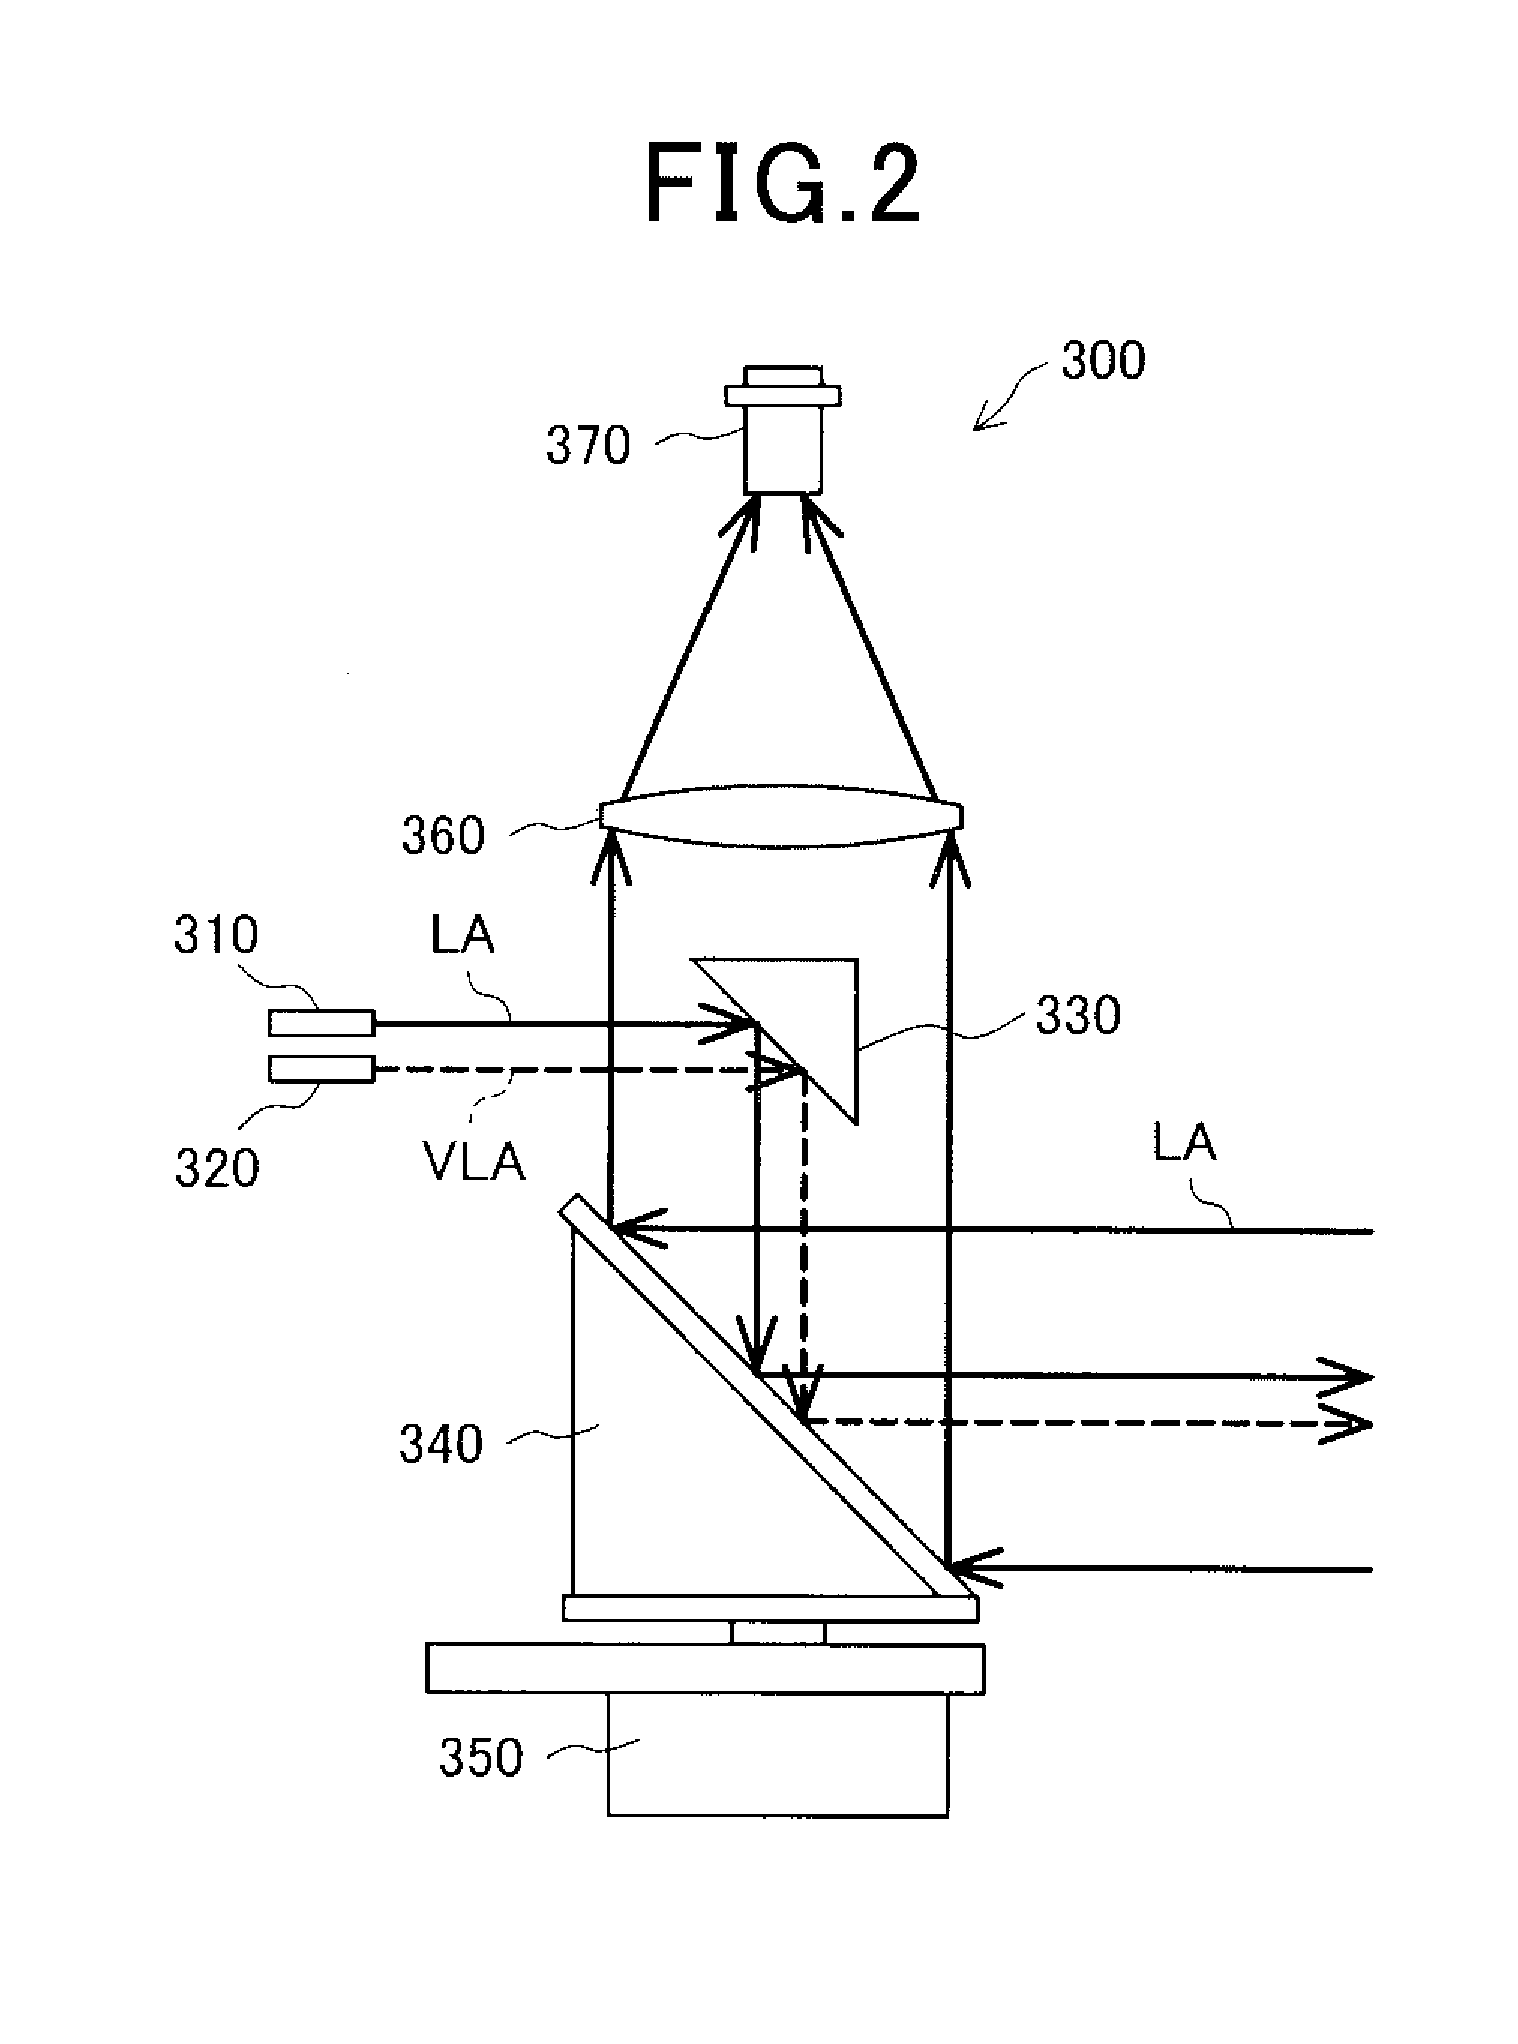 System and method for monitoring entry of object into surrounding area of robot